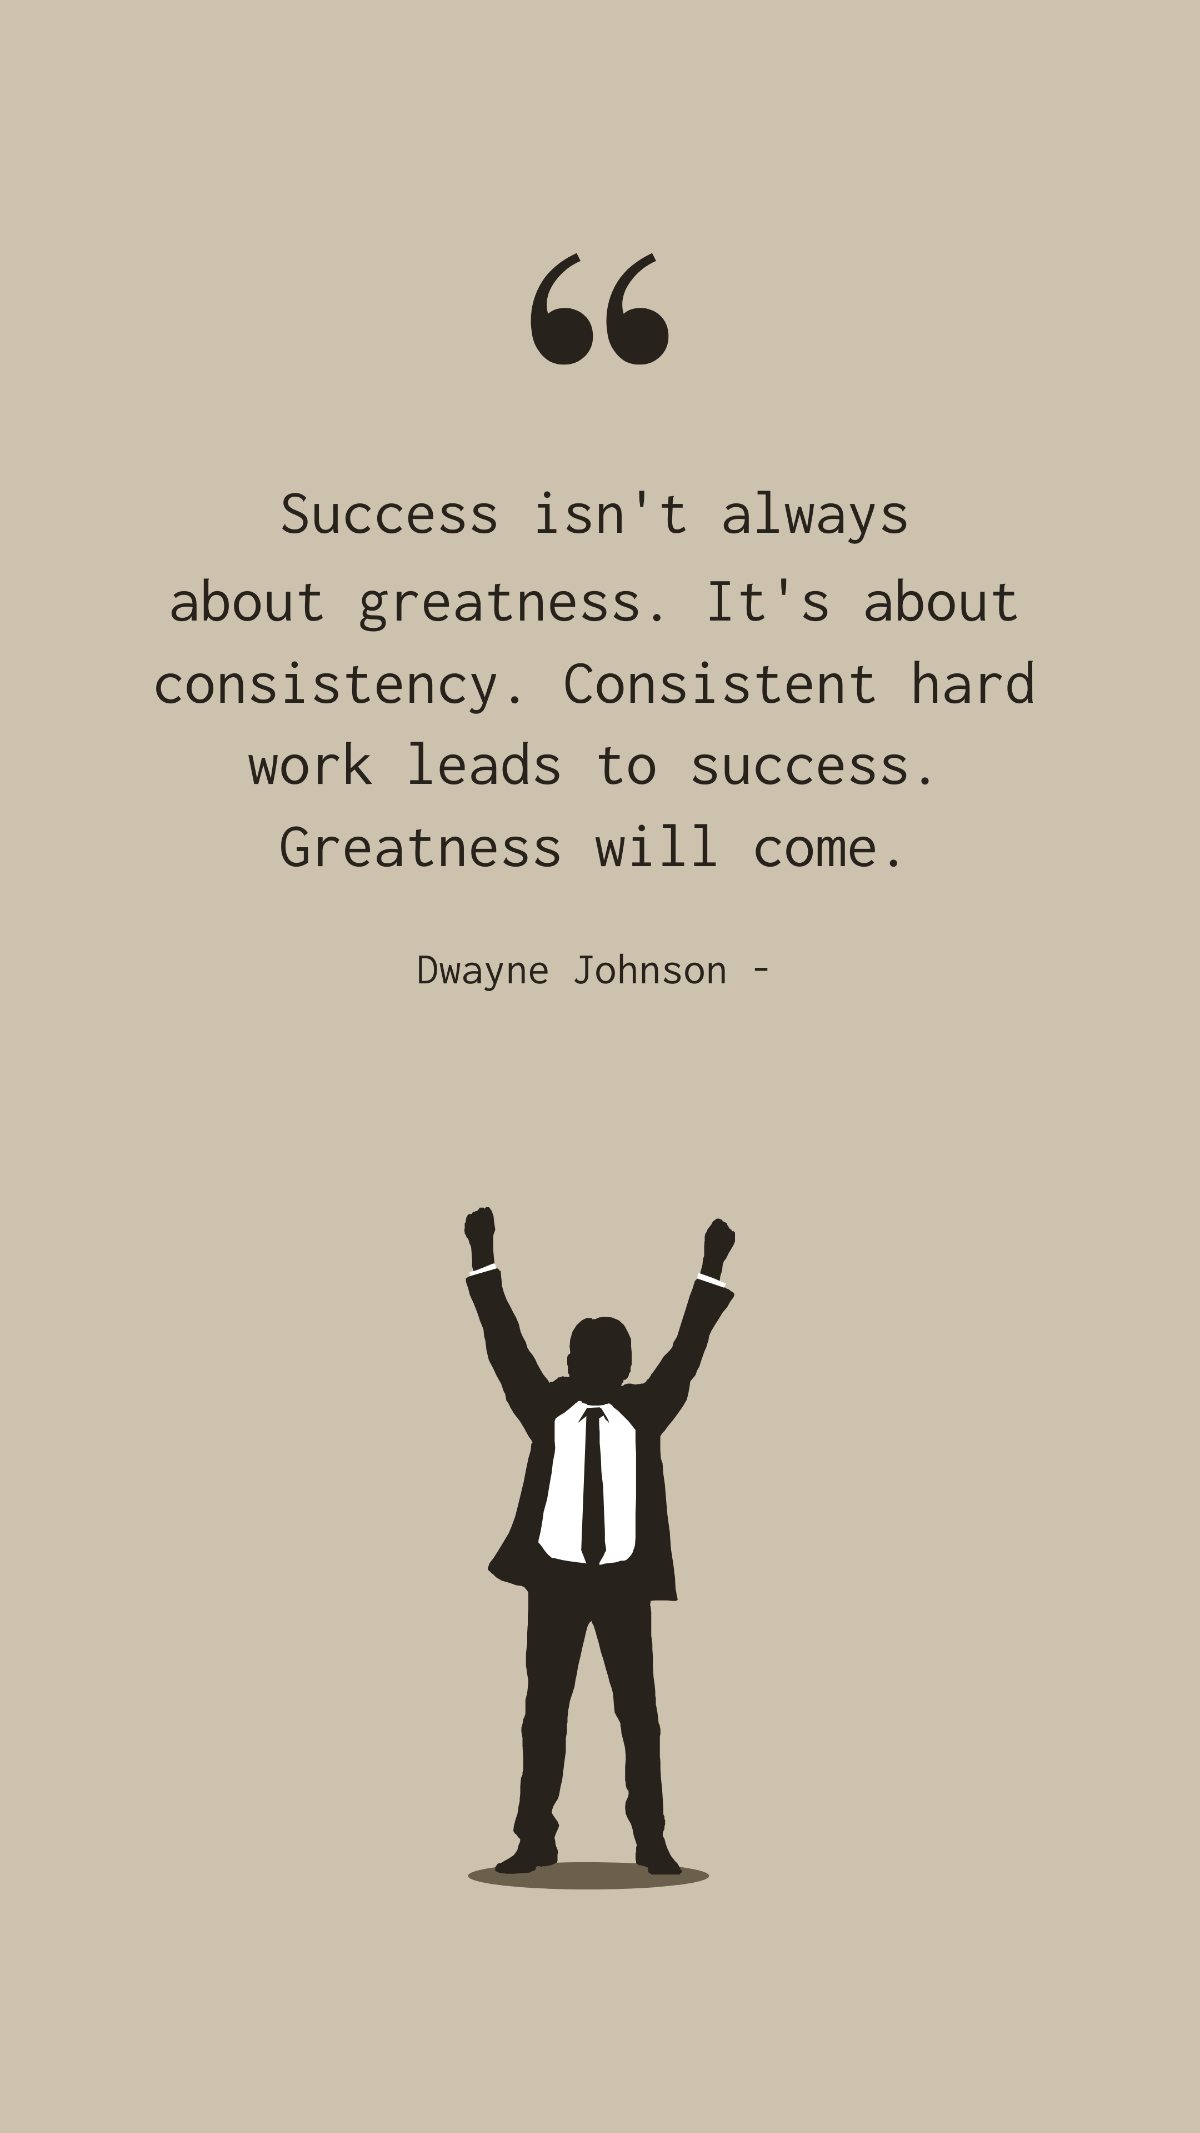 Free Dwayne Johnson - Success isn't always about greatness. It's about consistency. Consistent hard work leads to success. Greatness will come. Template